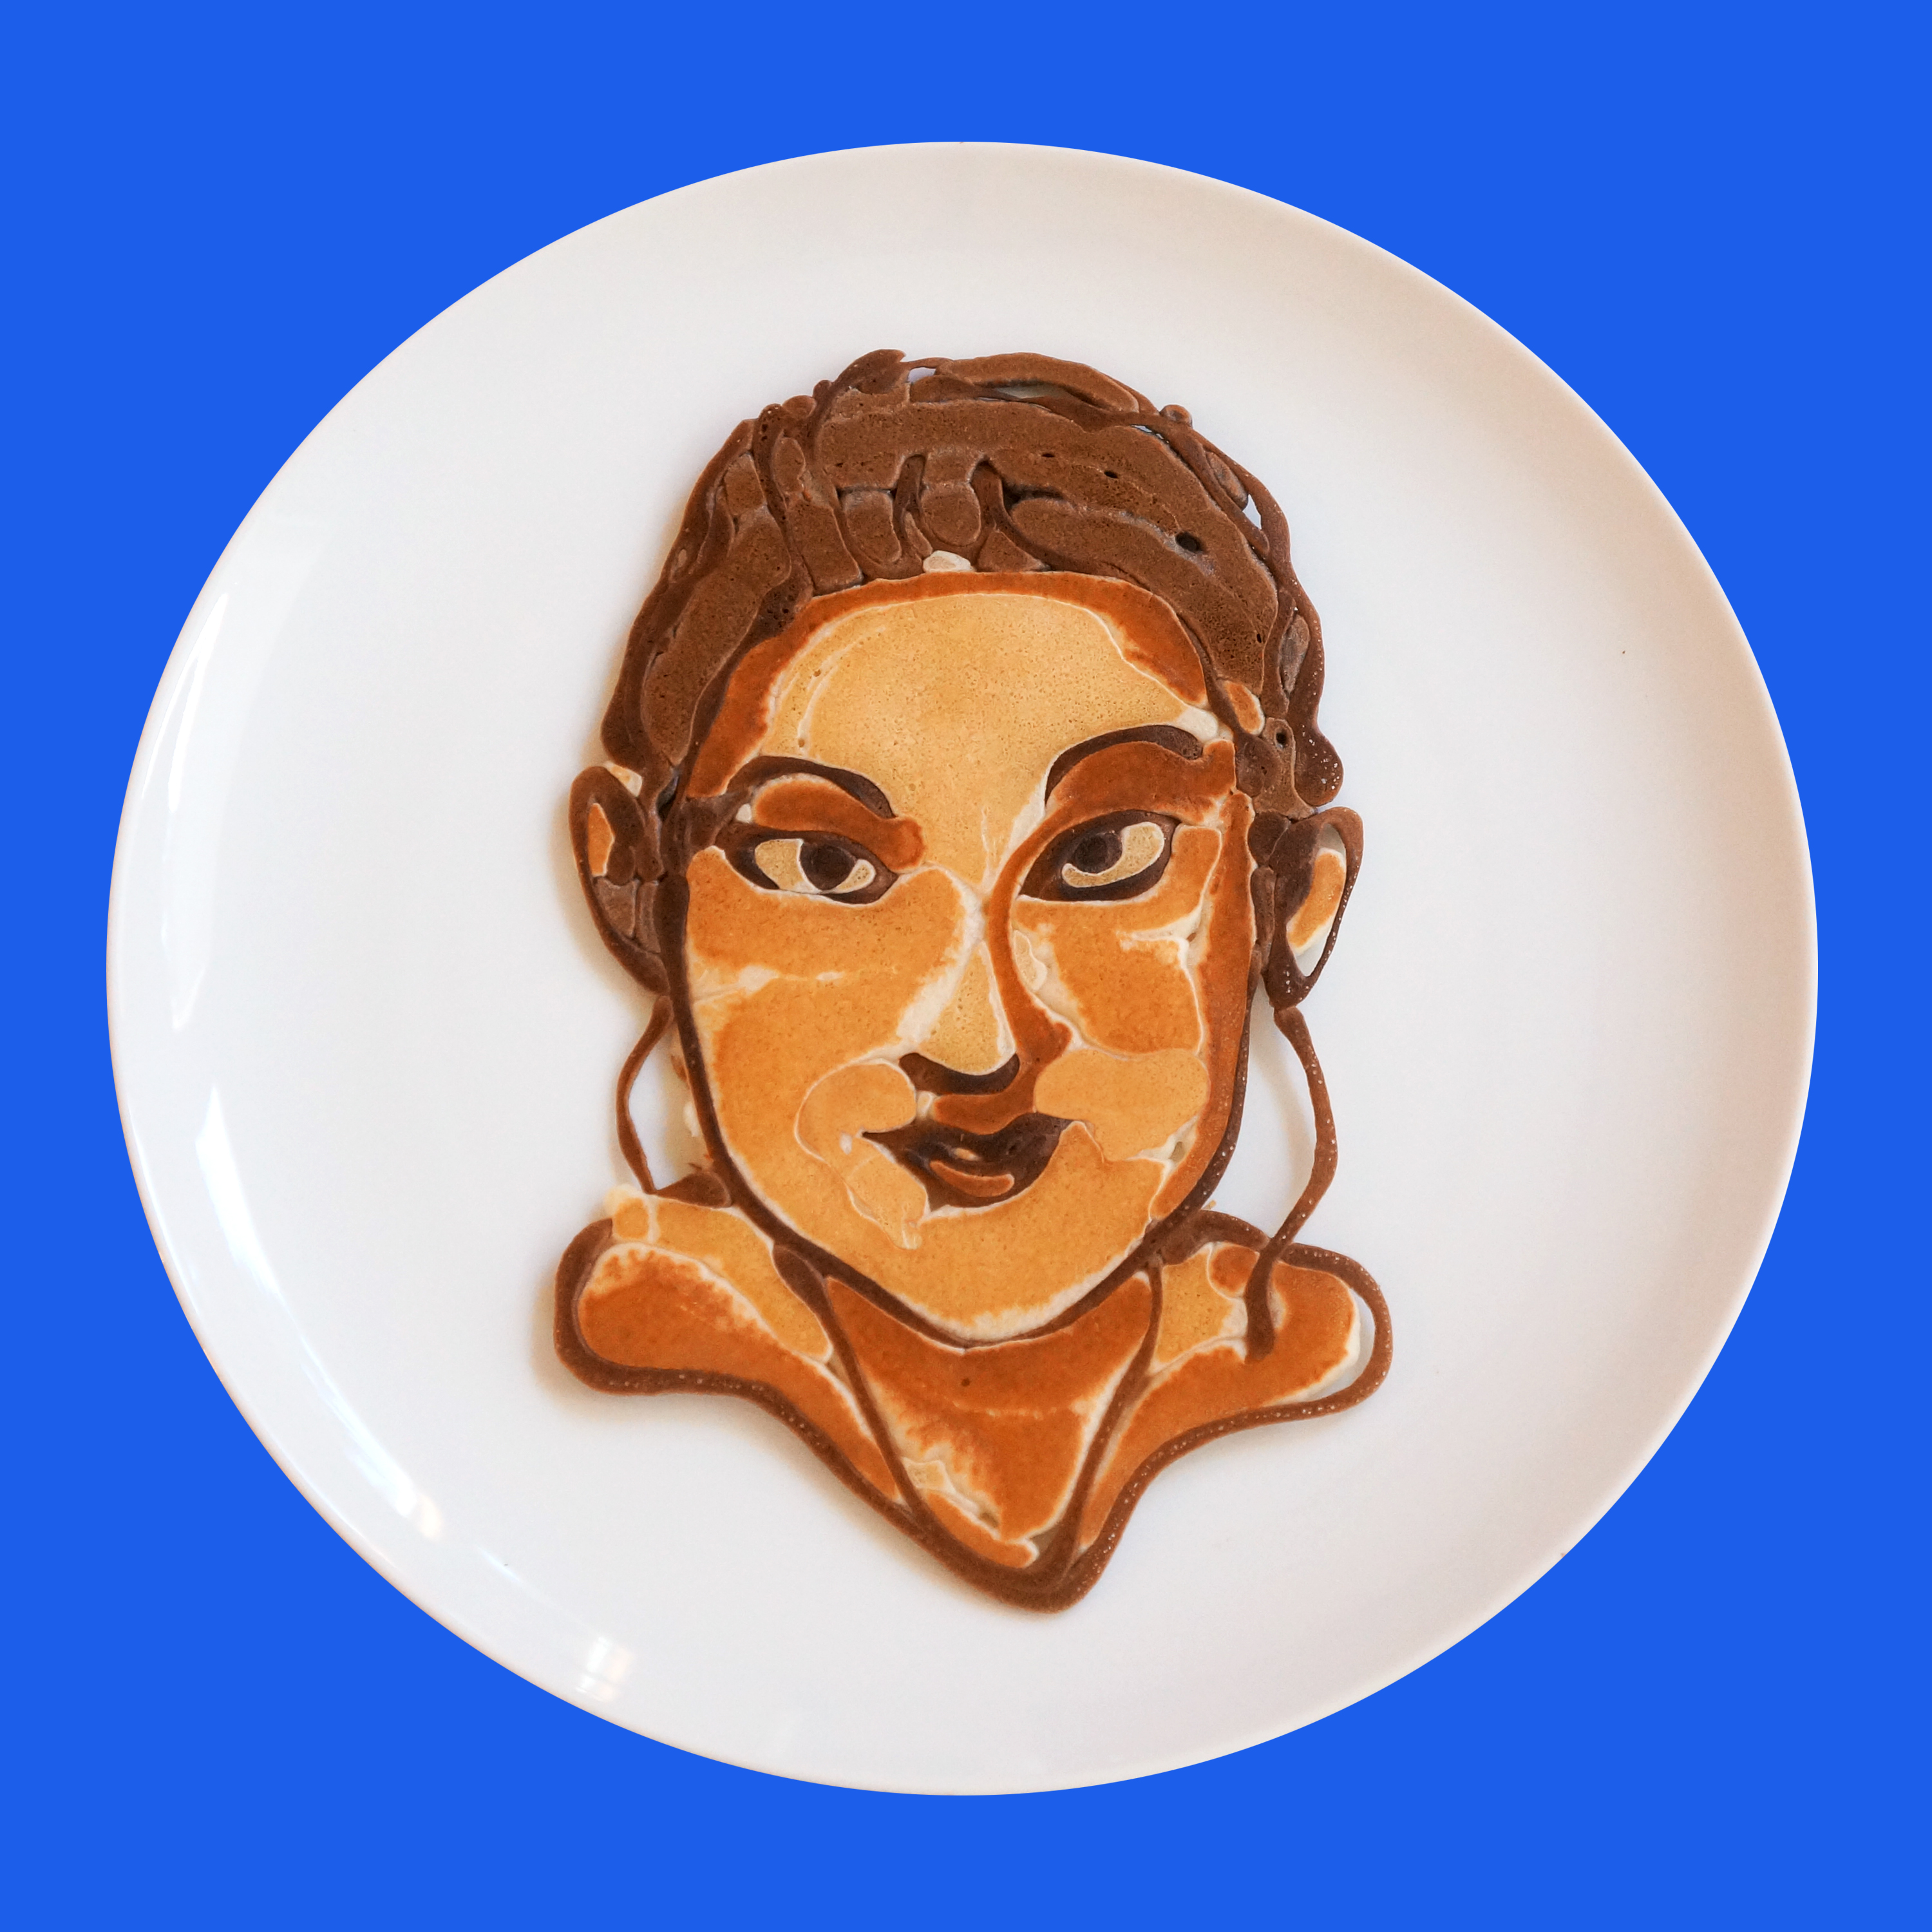 Nathan Shields creates pancake portraits of famous faces for NOW TV, Shailene Woodley from Big Little Lies